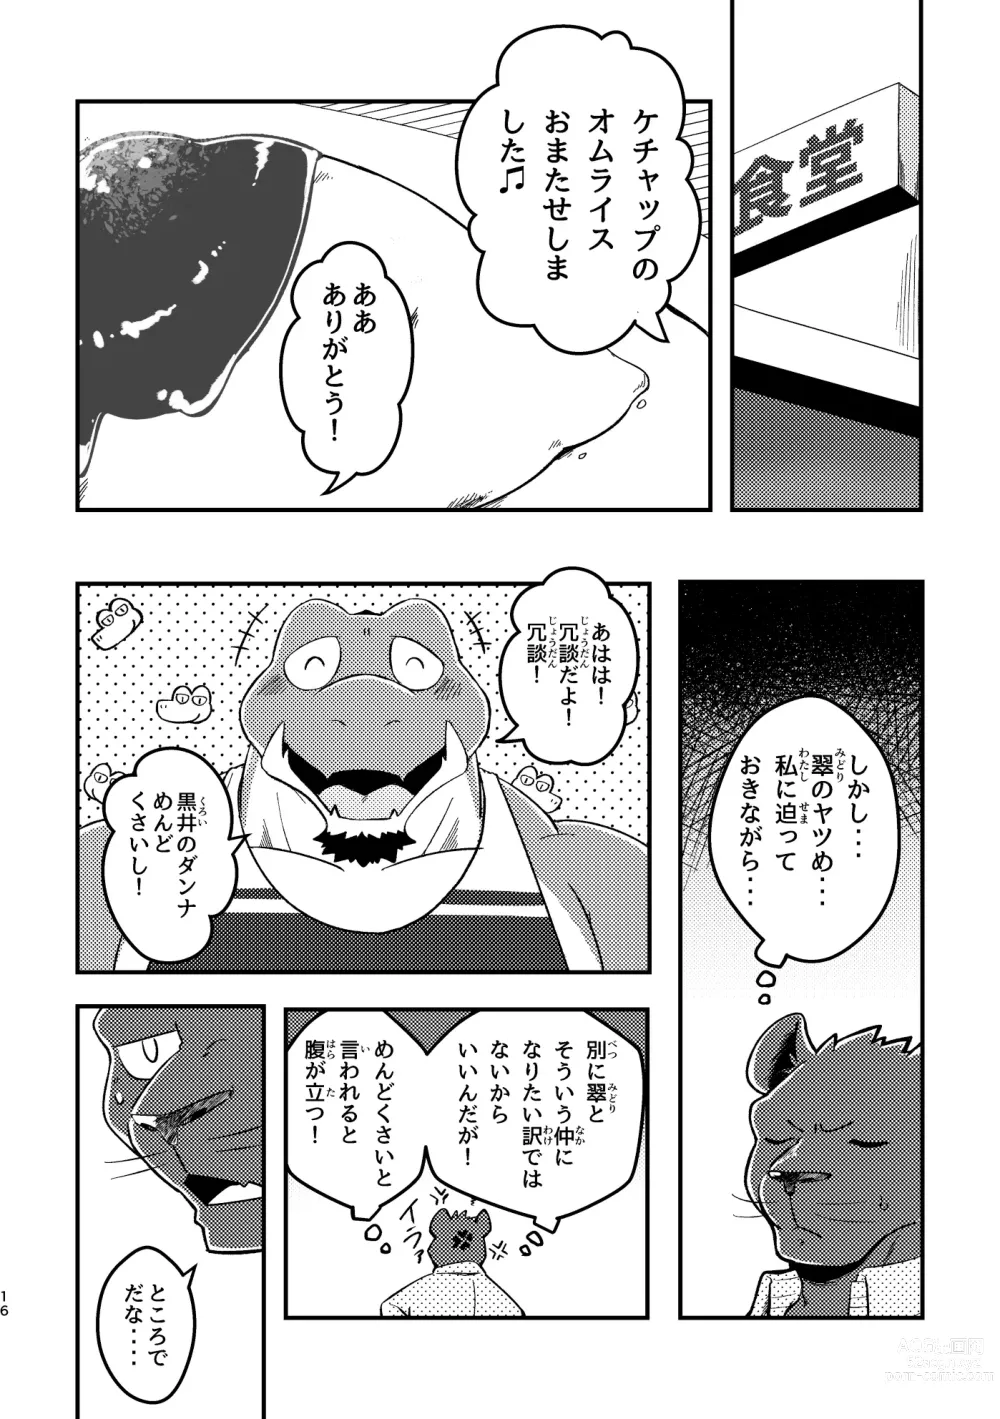 Page 16 of doujinshi Youkoso! Chimi Mouryou Dormitory -Volume 1-